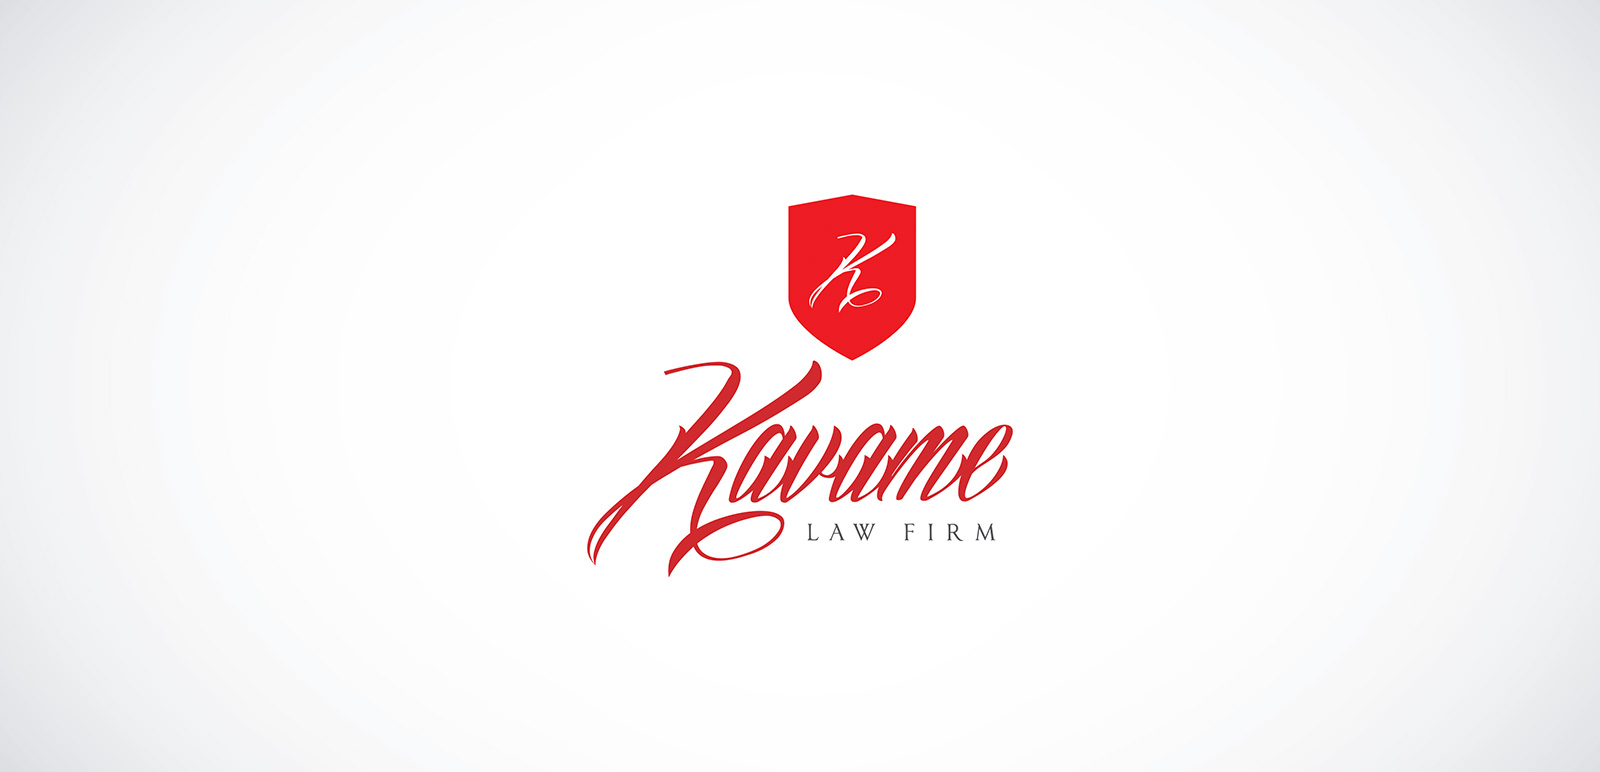 Kavame Law Firm Logo, Corporate Identity 1